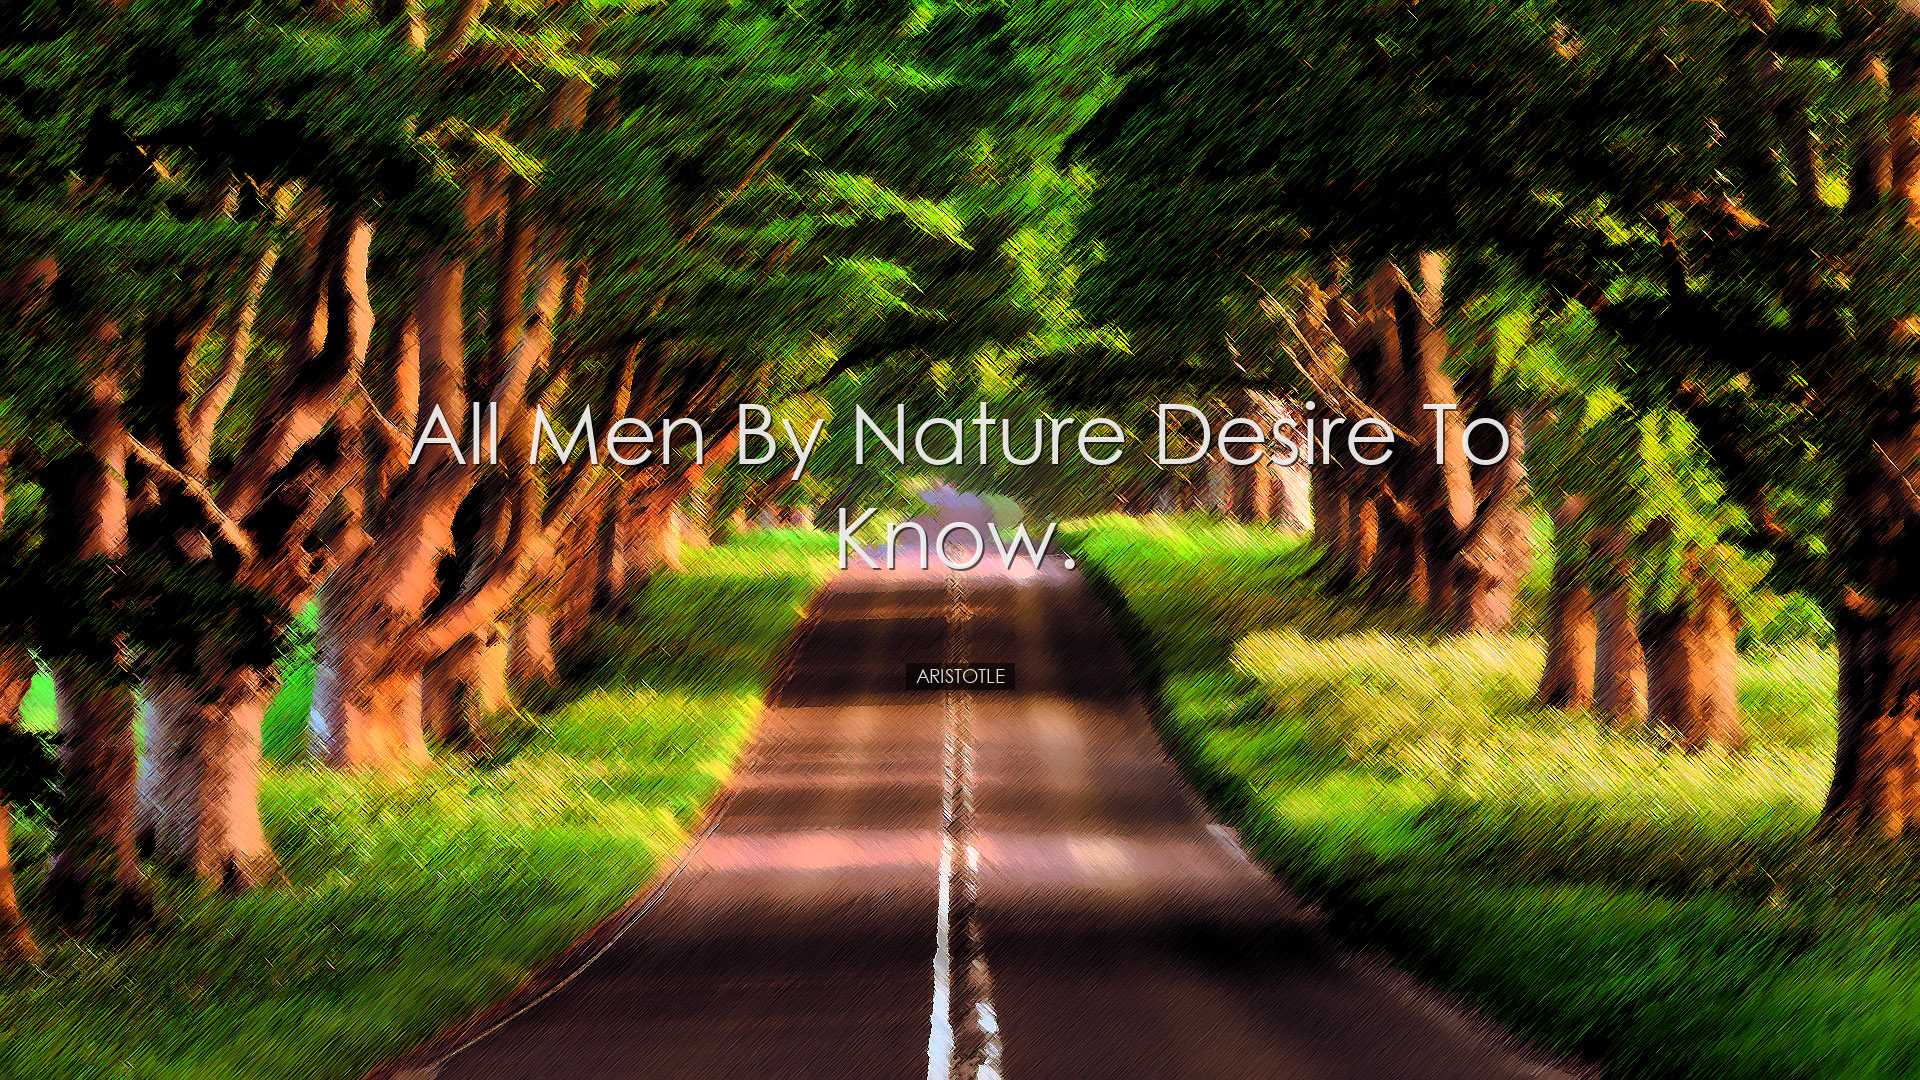 All men by nature desire to know. - Aristotle